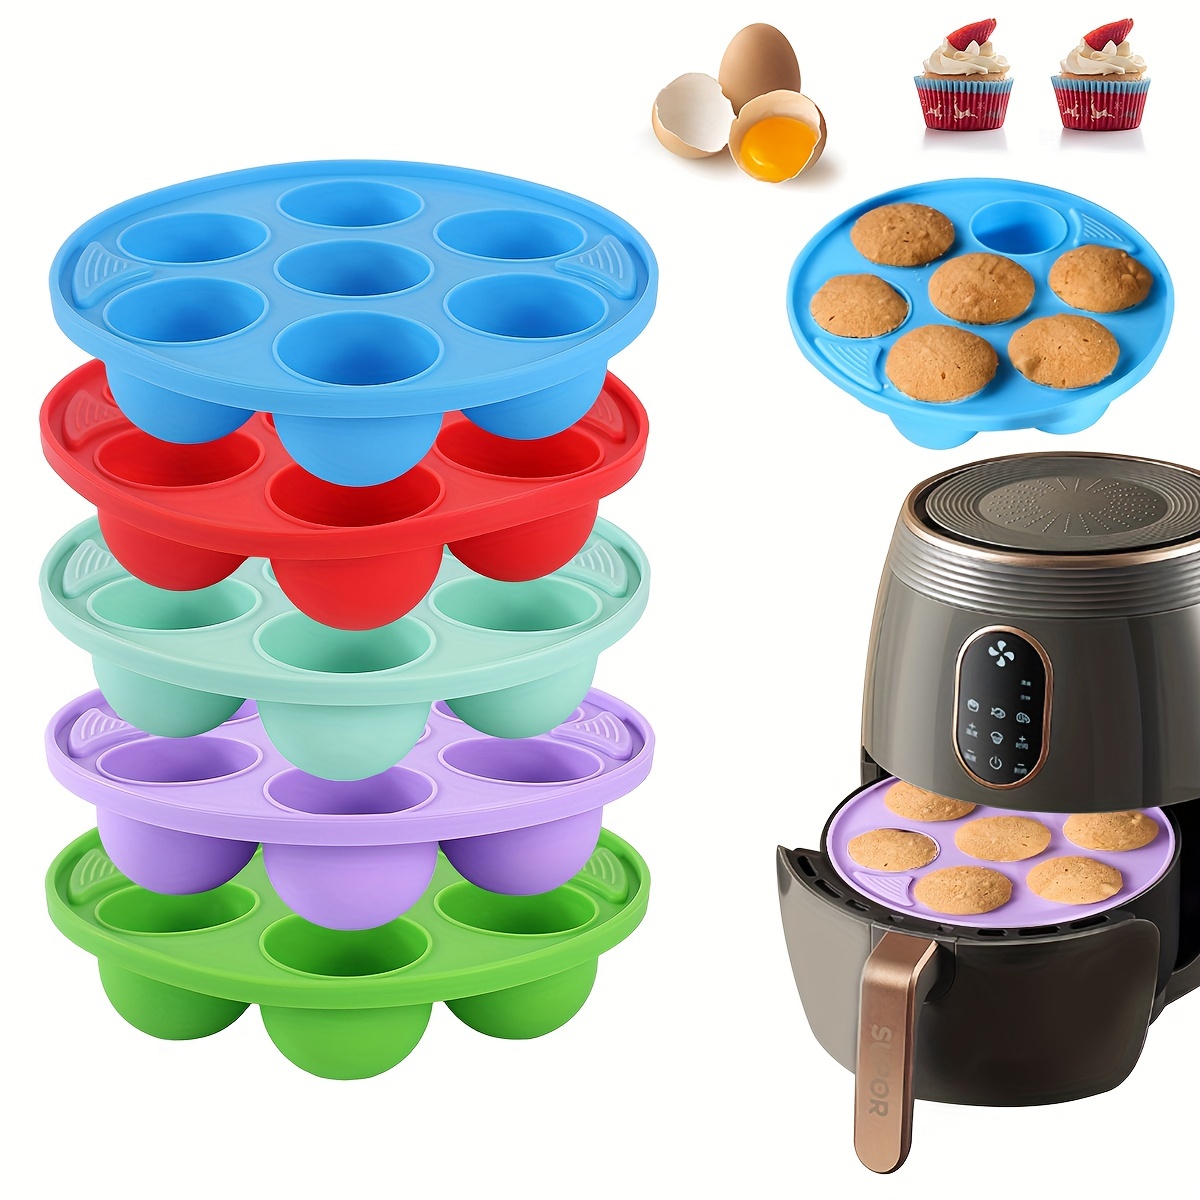 Silicone Egg Bite Mold, 7 Cavity Mini Cake Molds, Air Fryer Liners